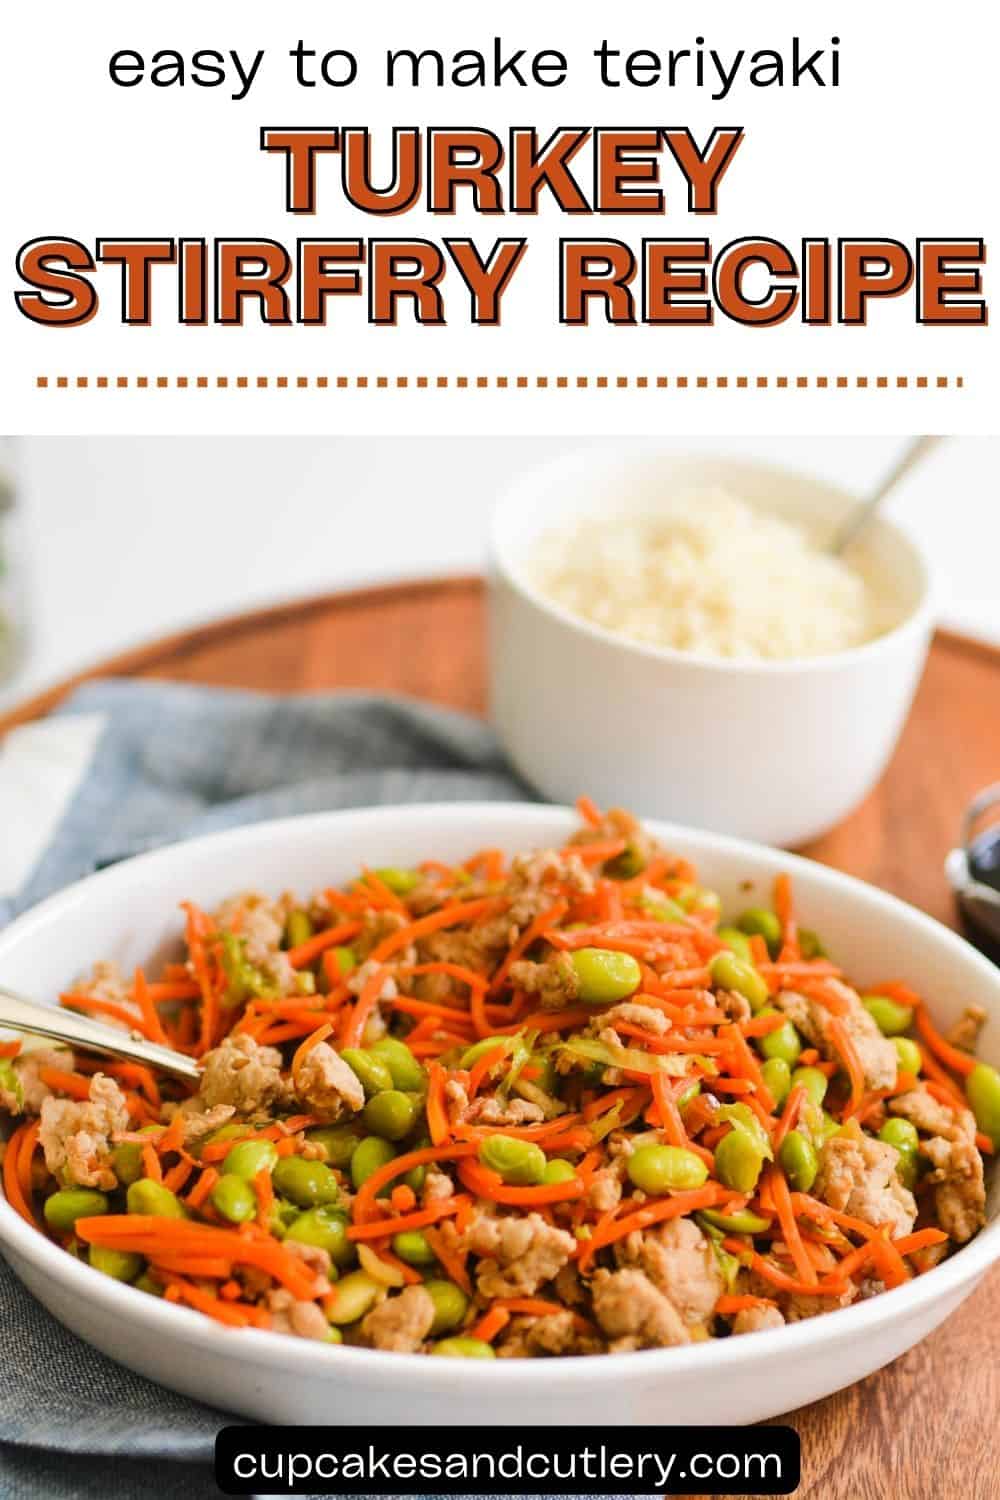 Text: Easy to Make teriyaki turkey stirfry recipe with a serving dish of ground turkey with vegetables and mixed with teriyaki sauce.